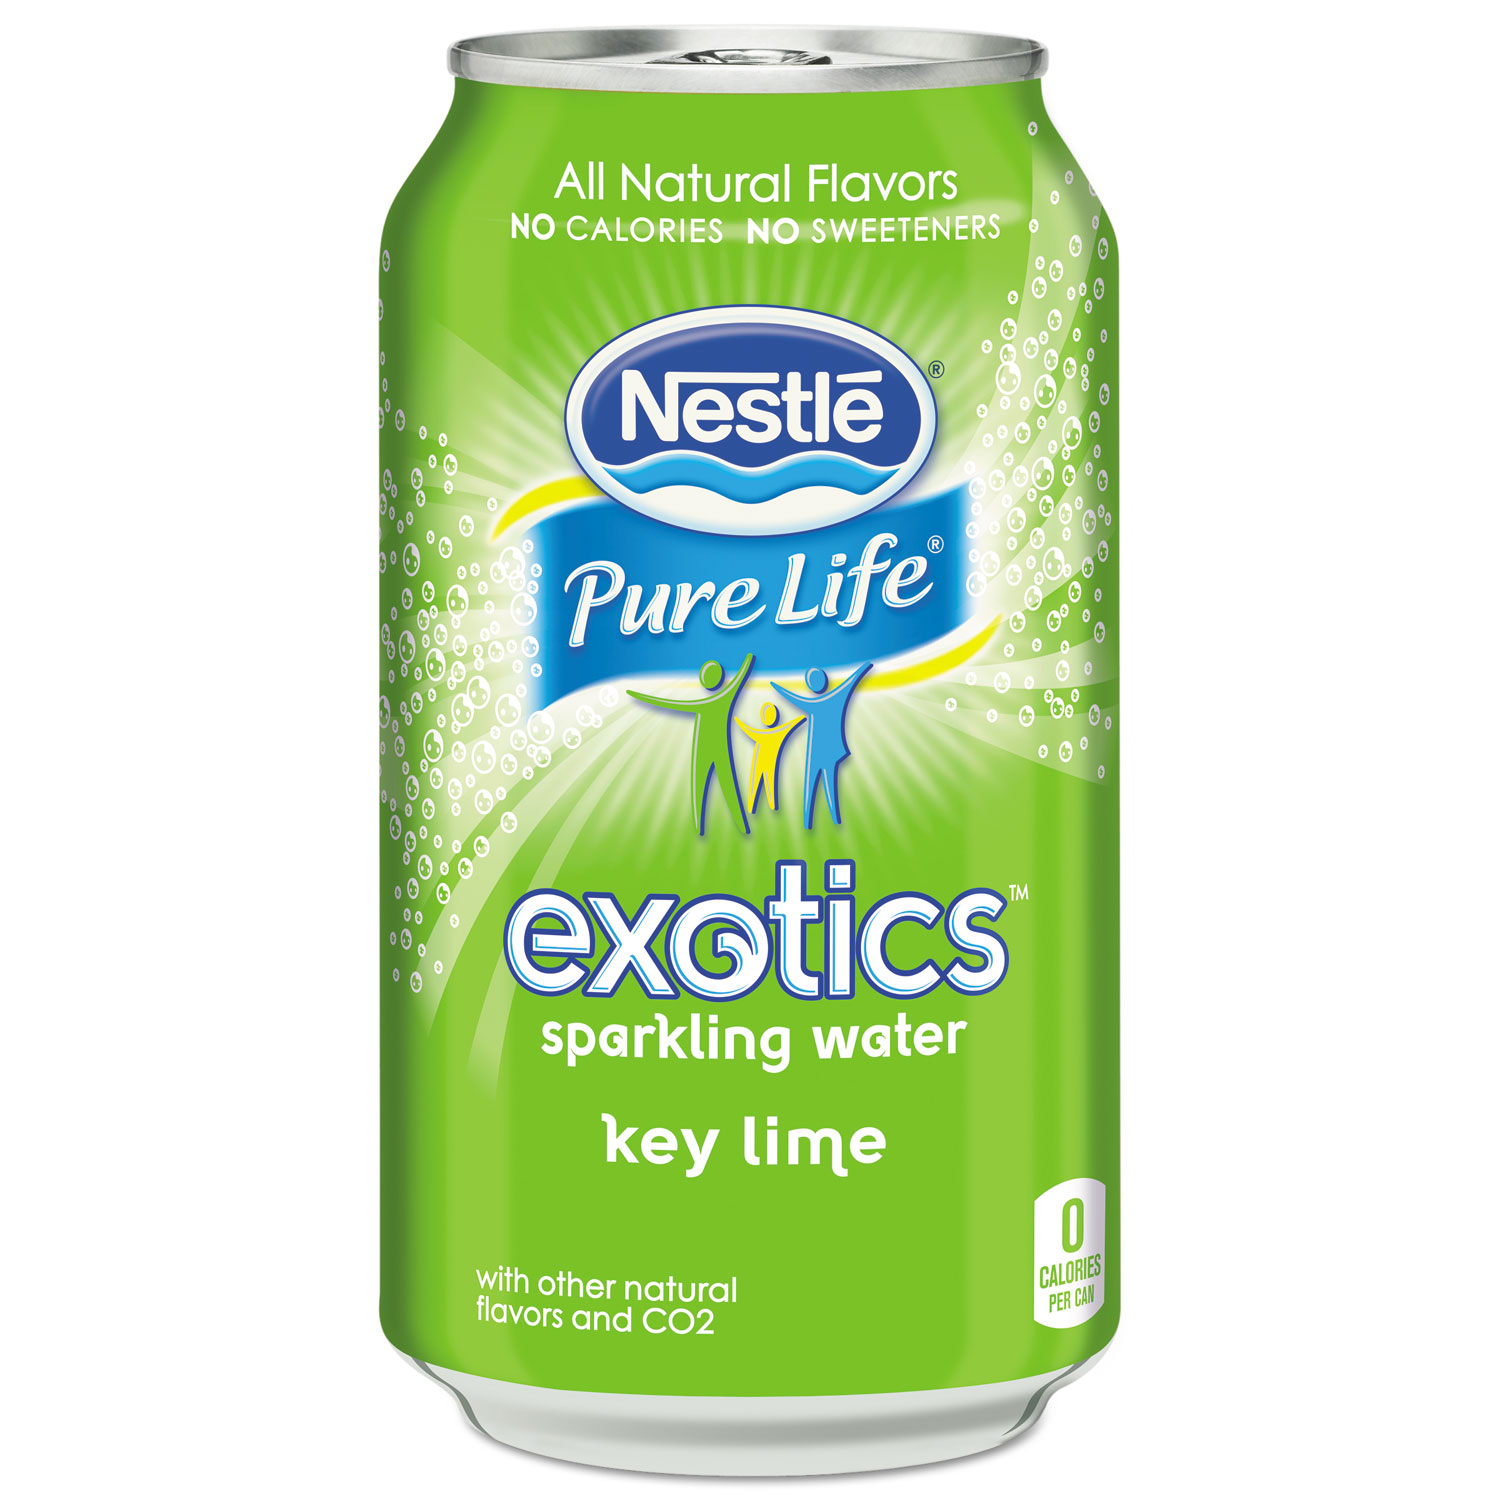 Pure Life Exotics Sparkling Water, Key Lime, 12 oz Can, 24/Carton